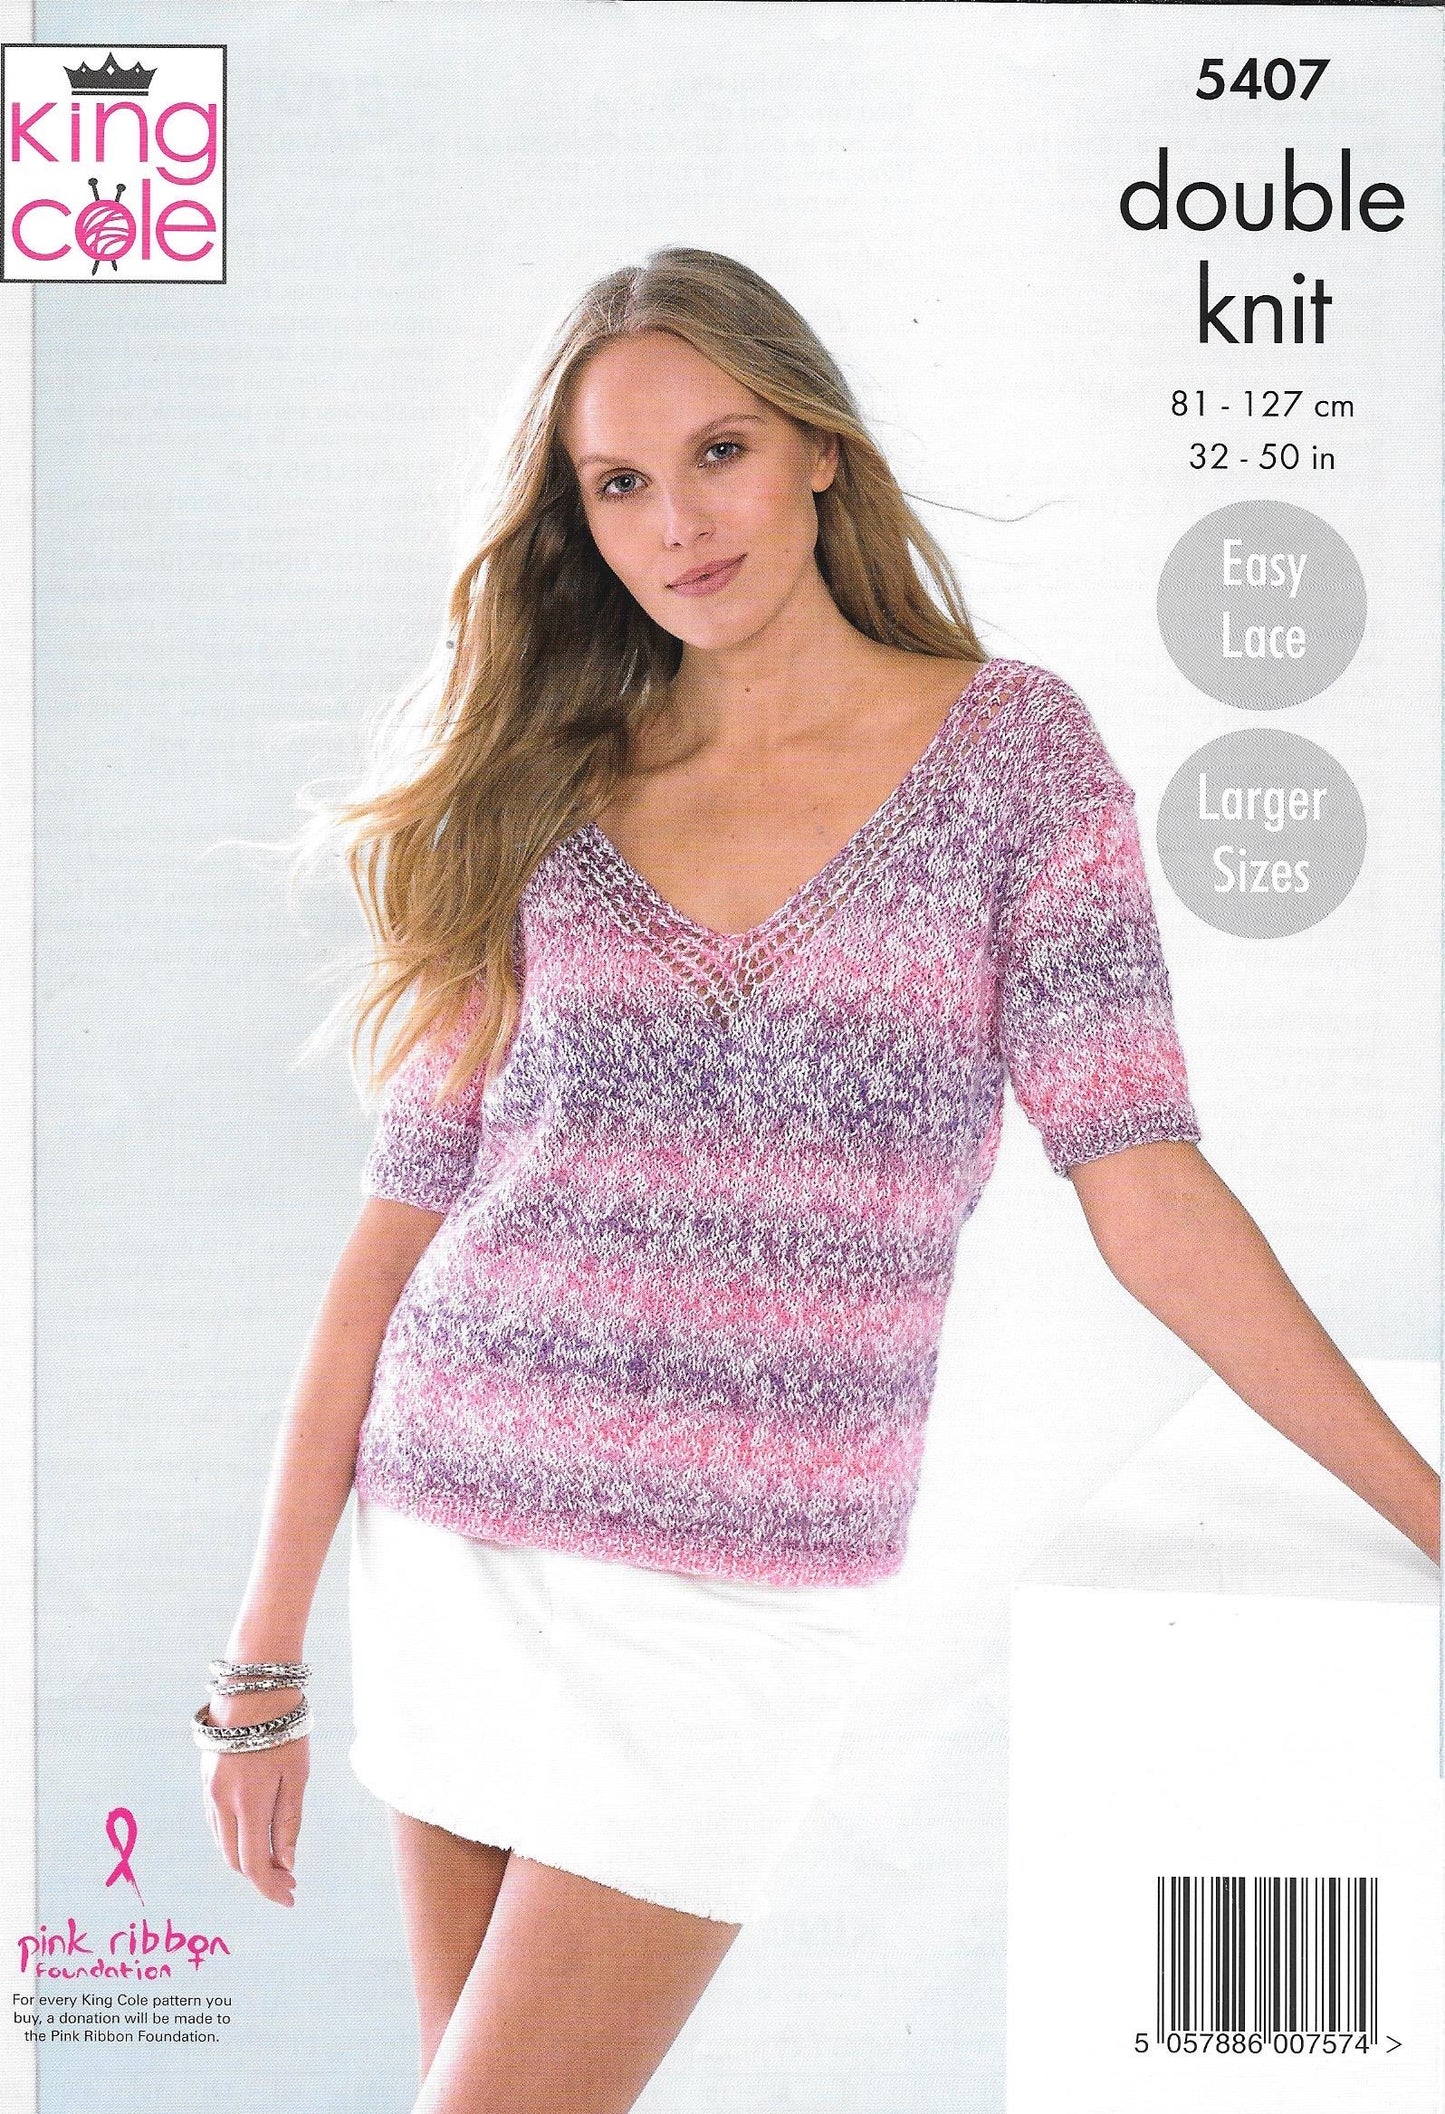 5407 King Cole Caribbean Calypso Dk Ladies Sleeveless and Short Sleeved Top Knitting Pattern